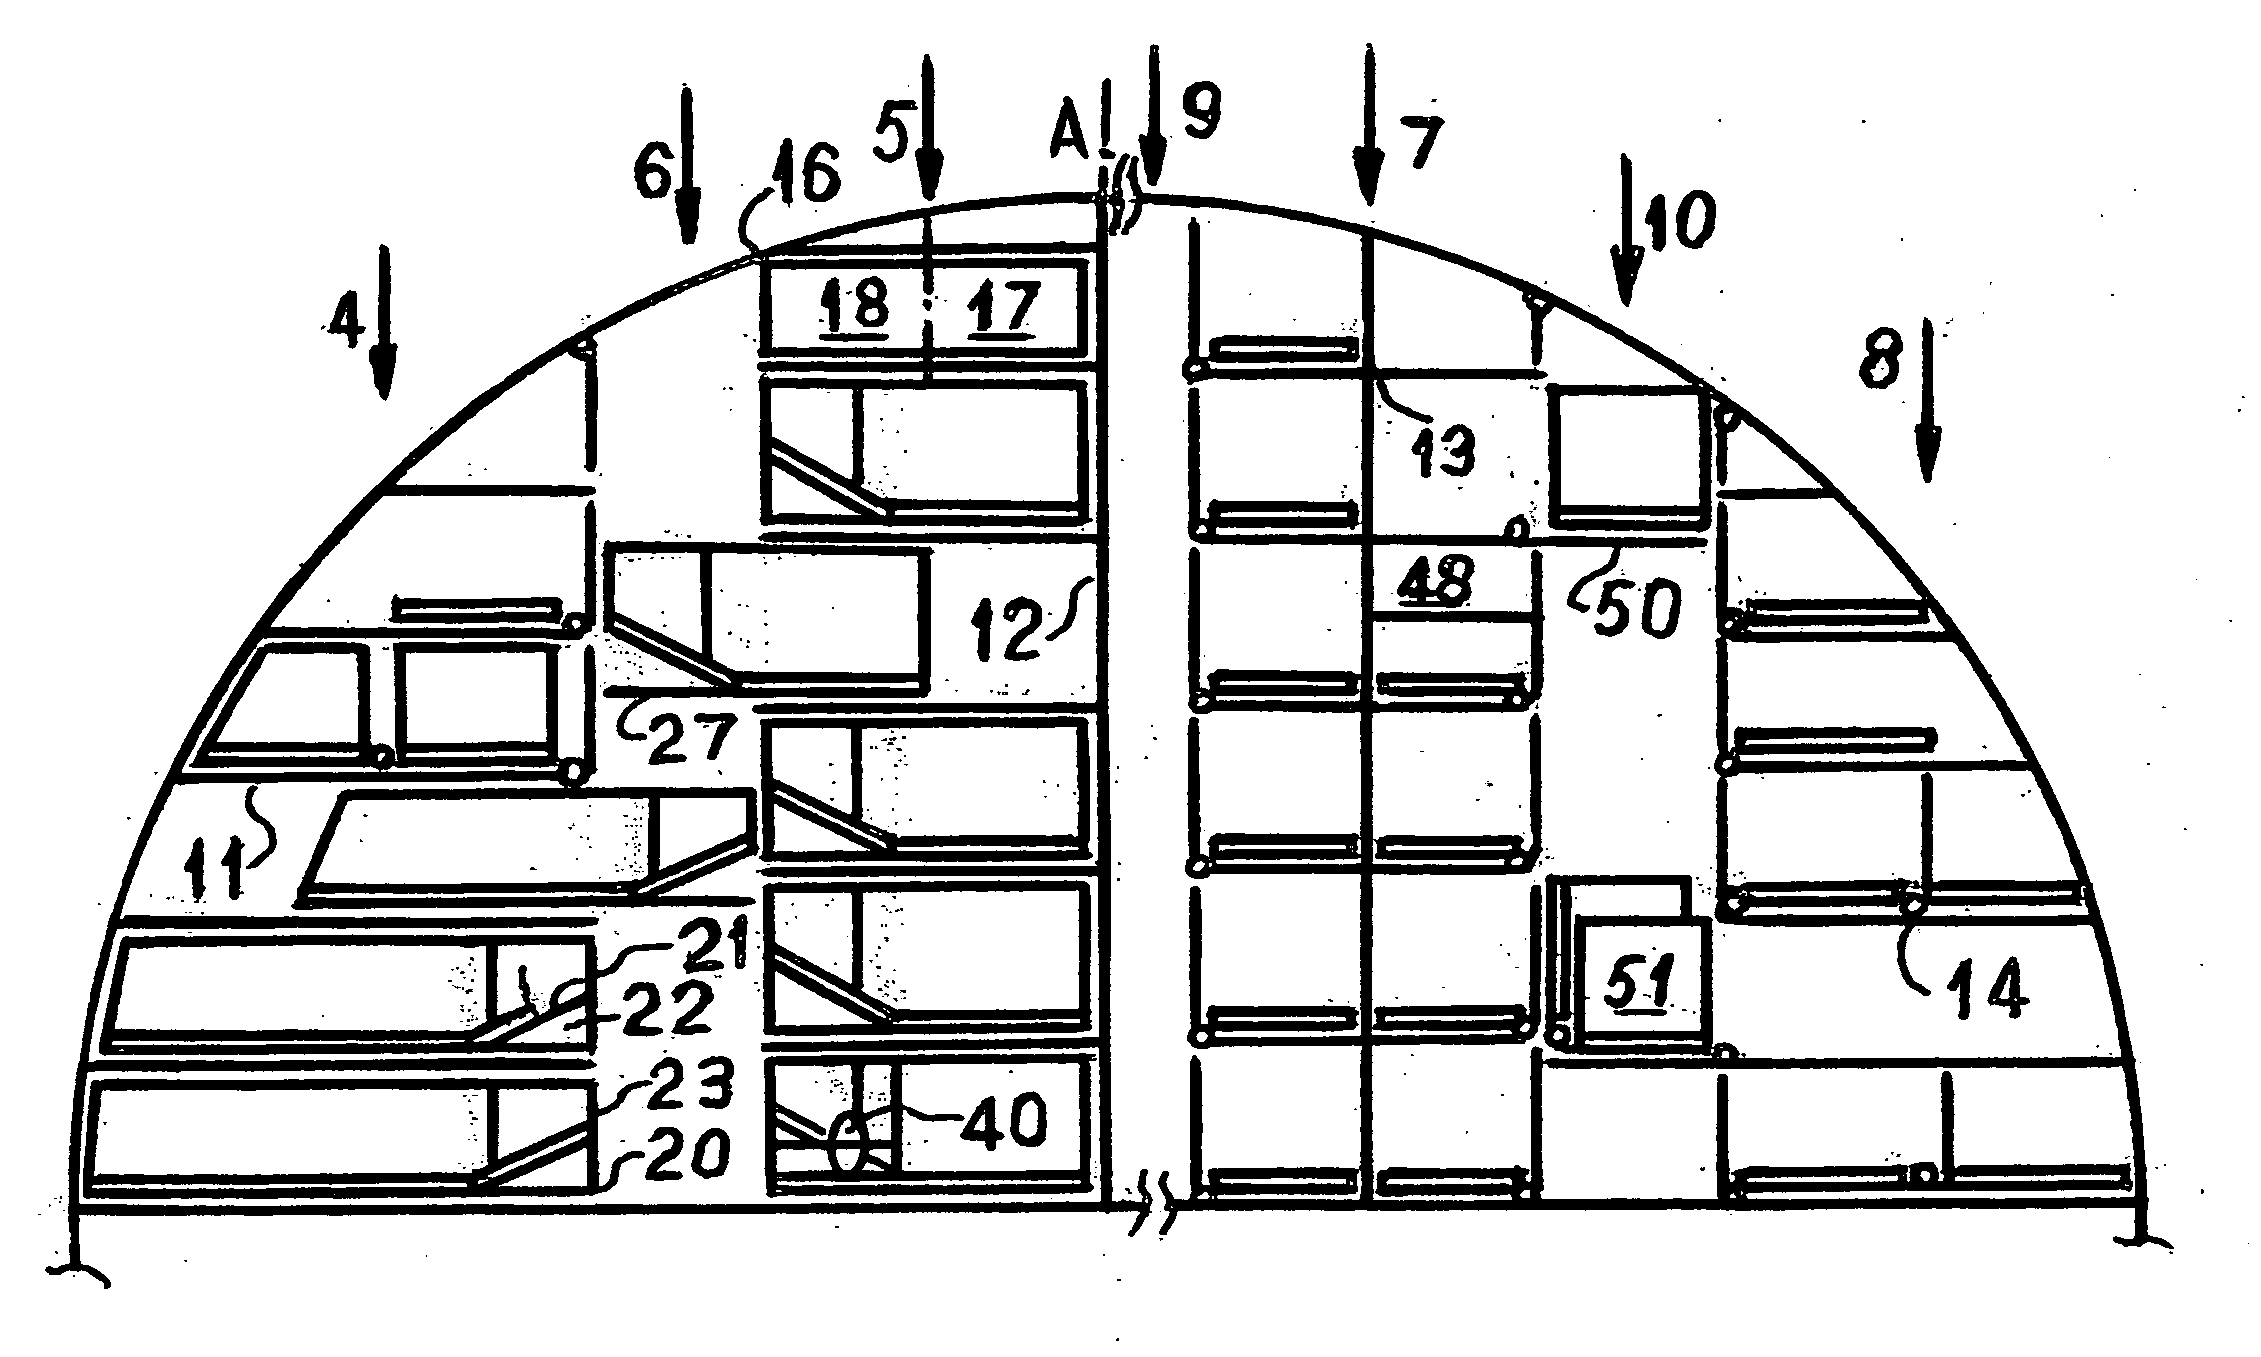 Arrays and method of private sheltering of occupied beds in aircraft